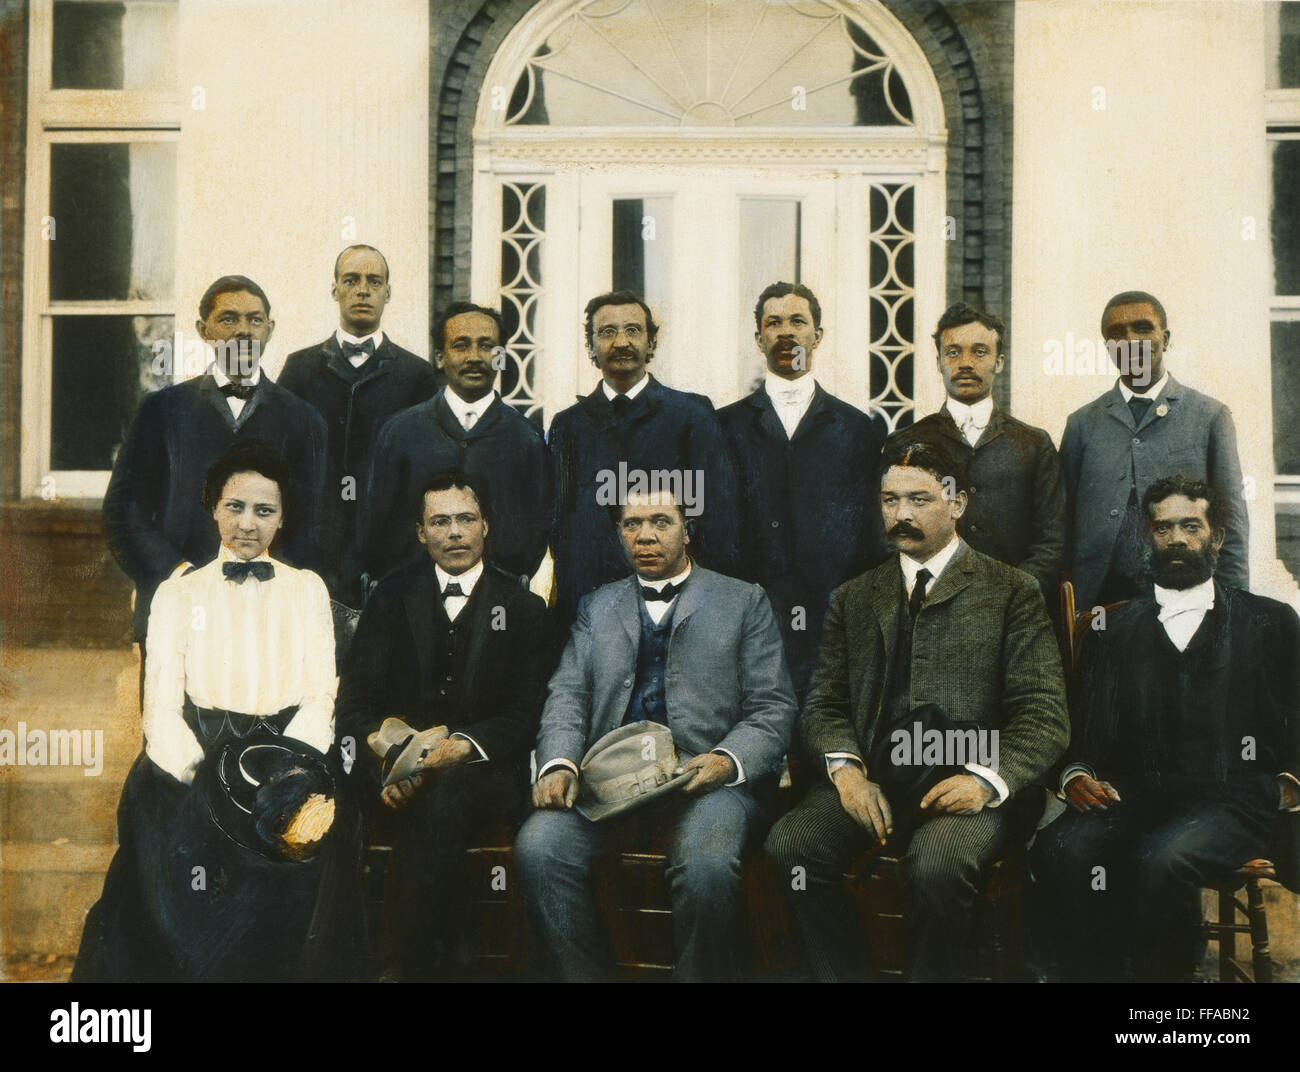 TUSKEGEE FACULTY COUNCIL. /nNovember 1902. Top row, left to right: Robert R. Taylor, R.M. Attwell, Julius B. Ramsey, Chaplain Edgar J. Penny, M.T. Driver, William Maberry, George Washington Carver. Bottom row, left to right: Jane E. Clark, Emmett J. Scott Stock Photo